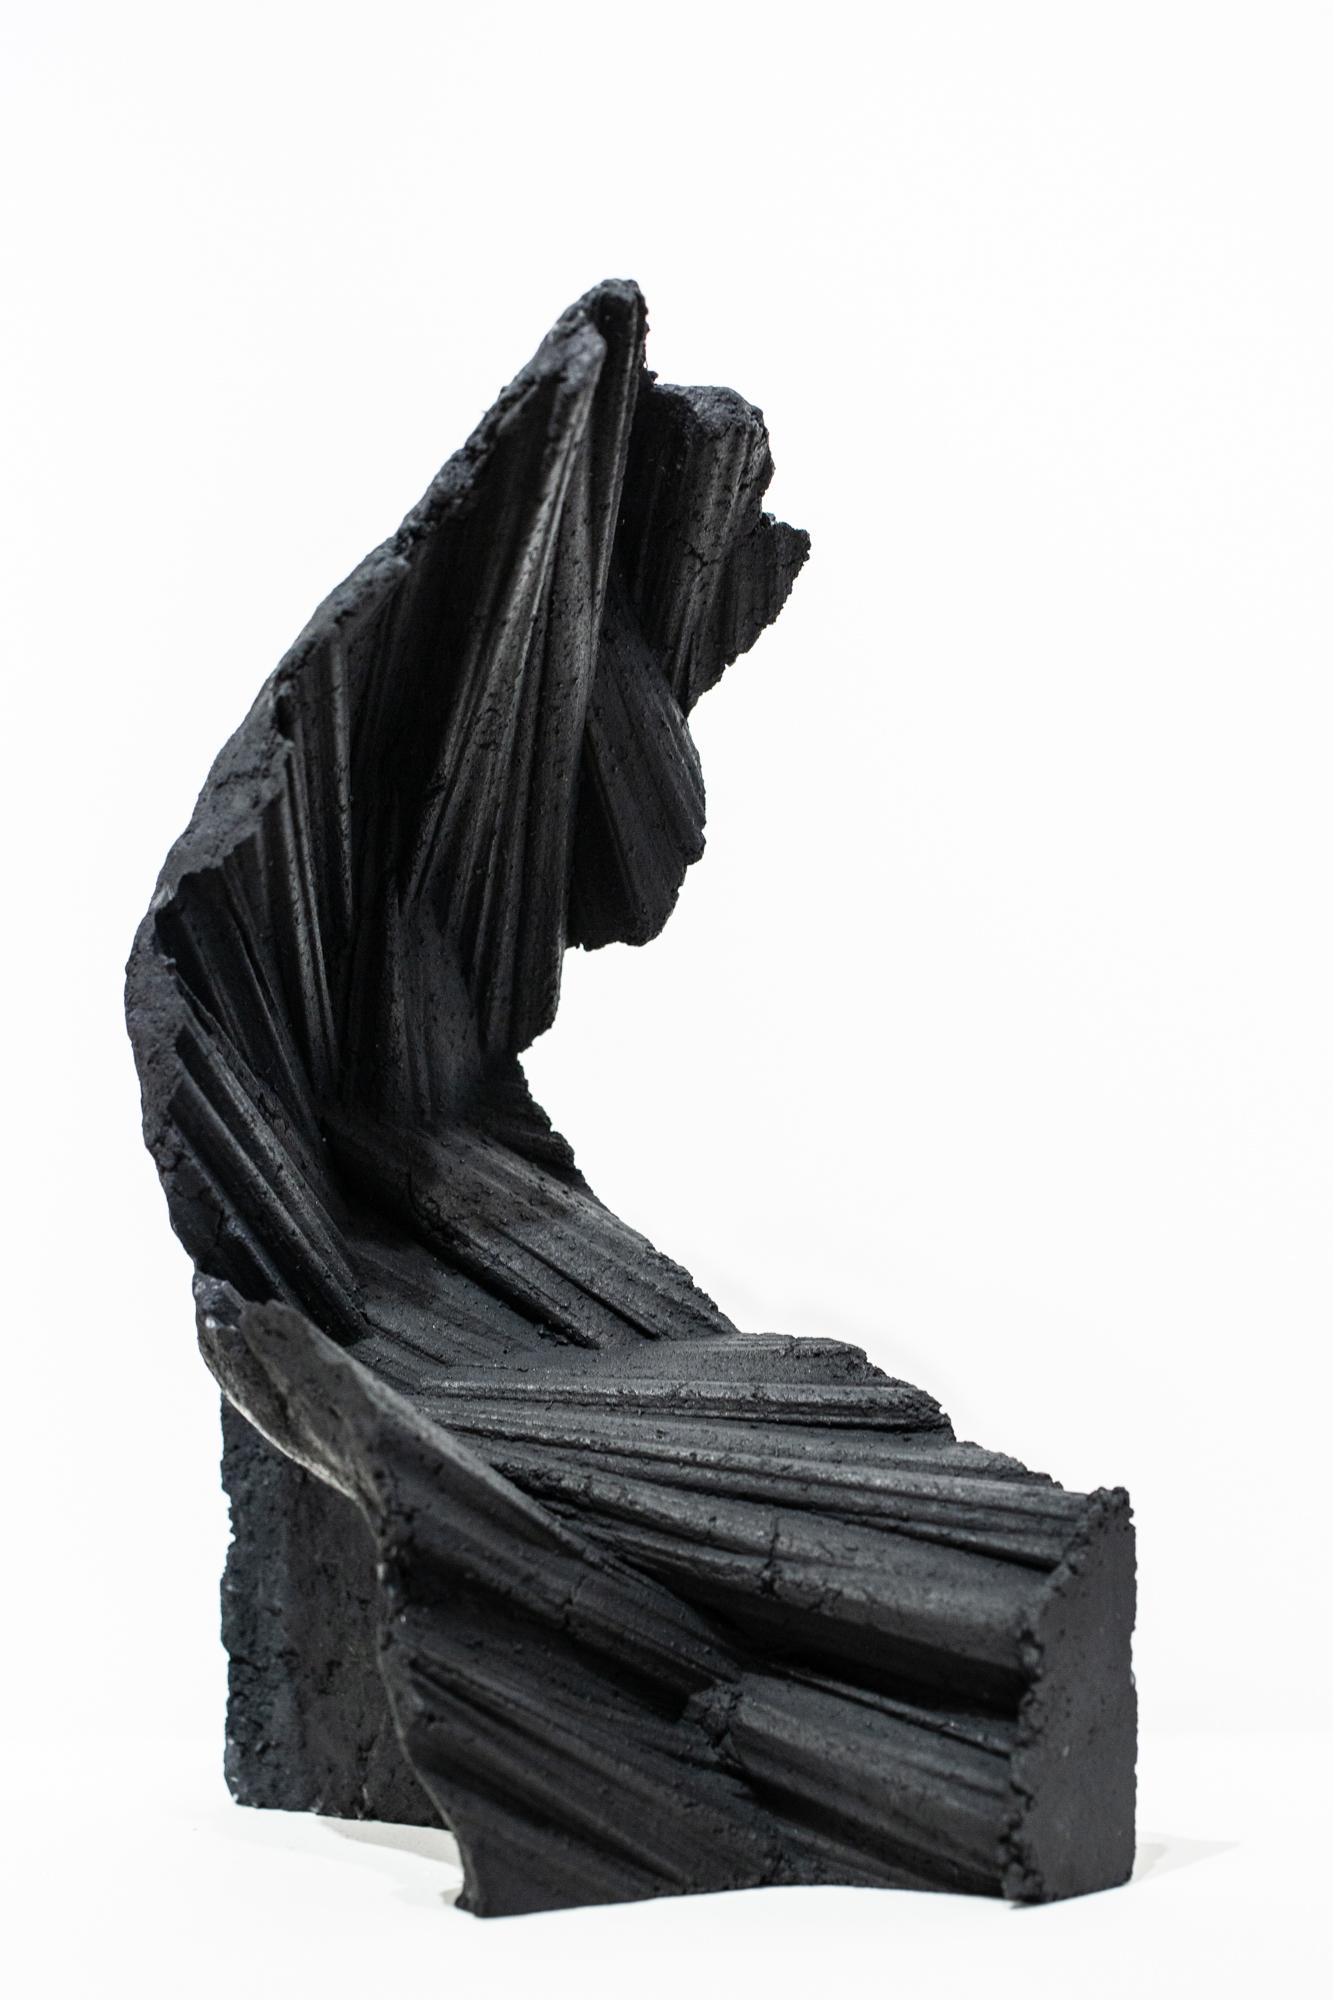 Deane McGahan Abstract Sculpture - "Intrinsic", Abstract, Black, Sculpture, Textured, Concrete, Free-Standing